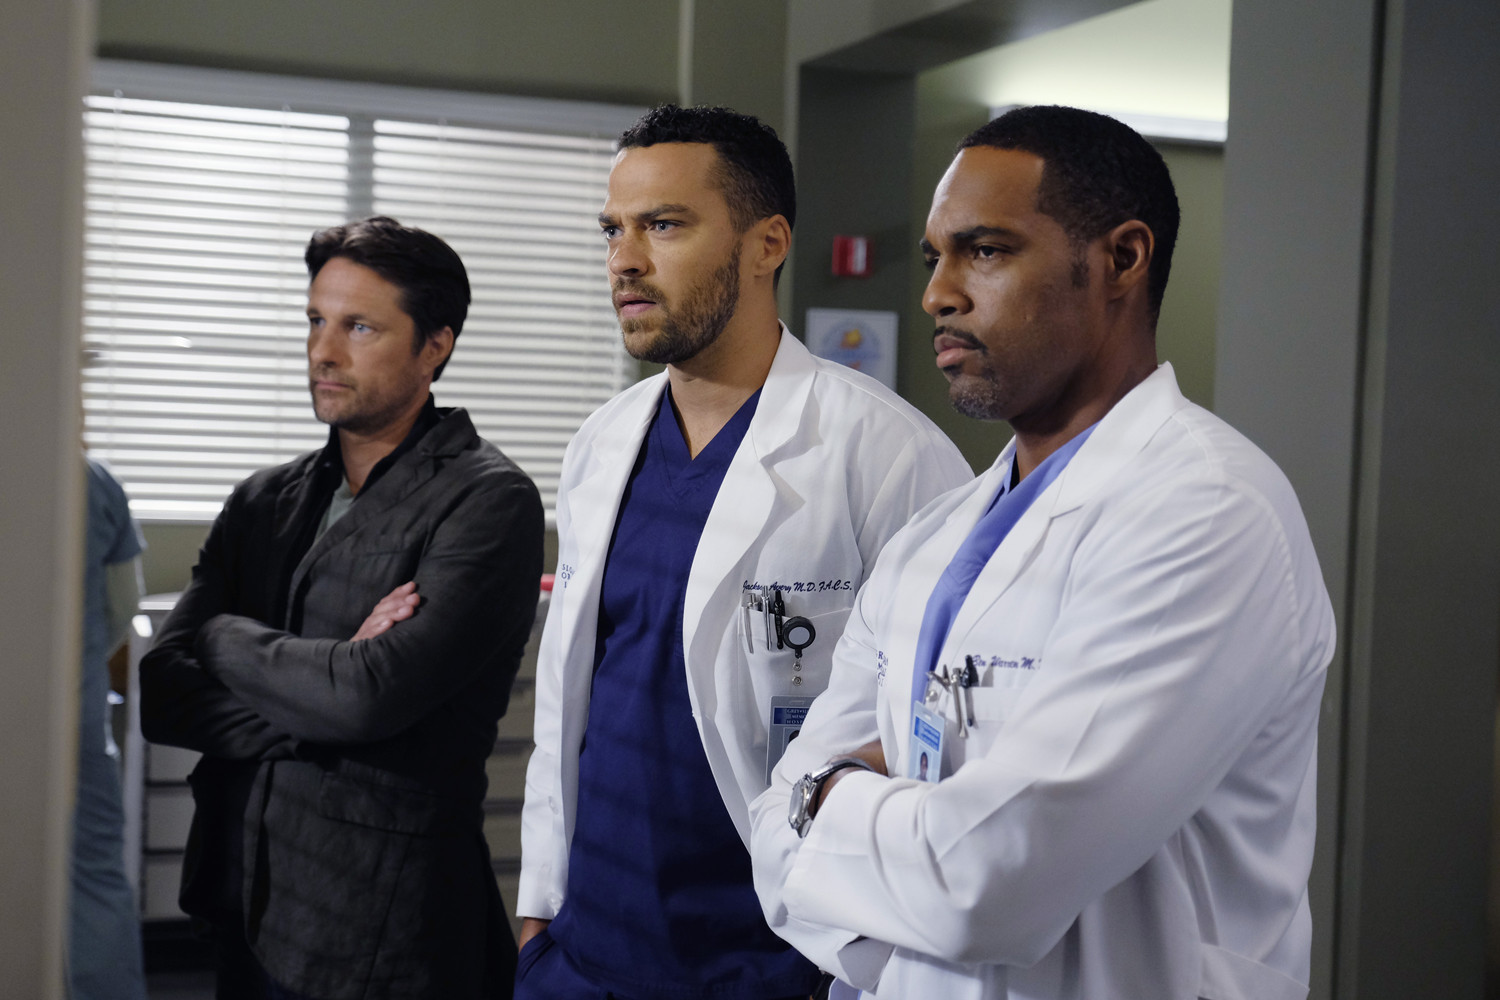 Jason George (right) on the set of Greys Anatomy during a scene